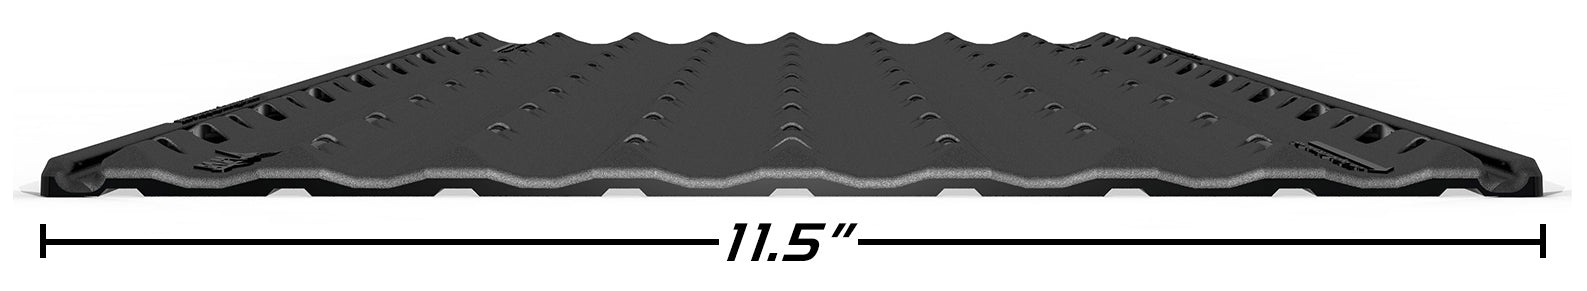 Lowpro Glides Wide 11.5" Wide 1 Piece Replacement